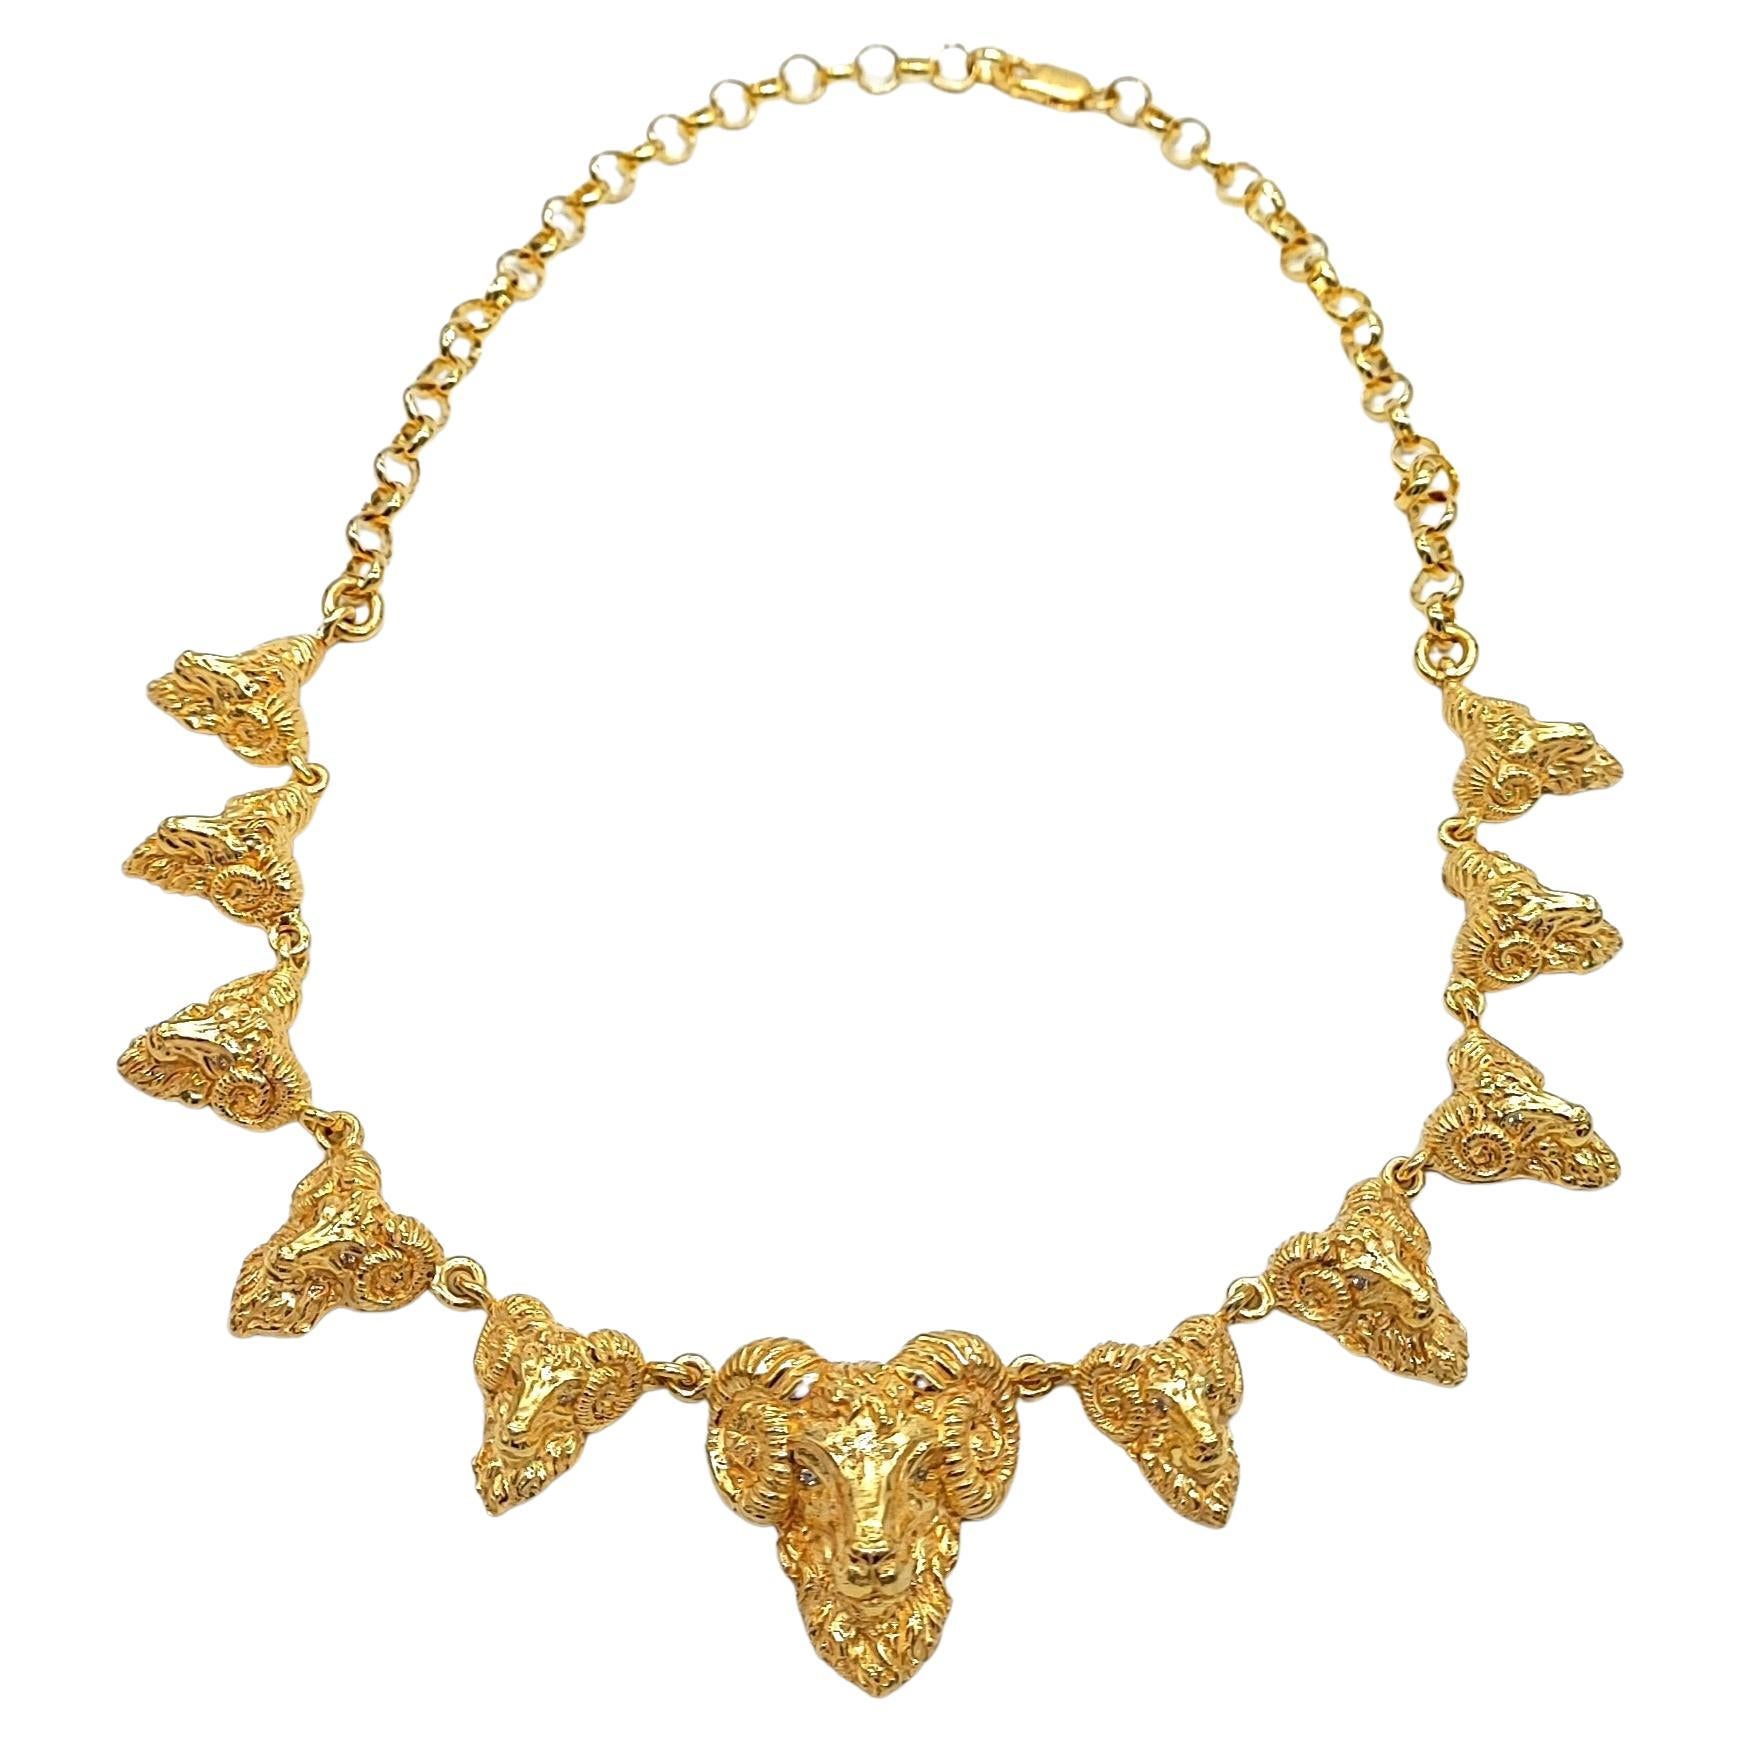 Aries Head 14 Karat Solid Gold Necklace with Diamonds For Sale